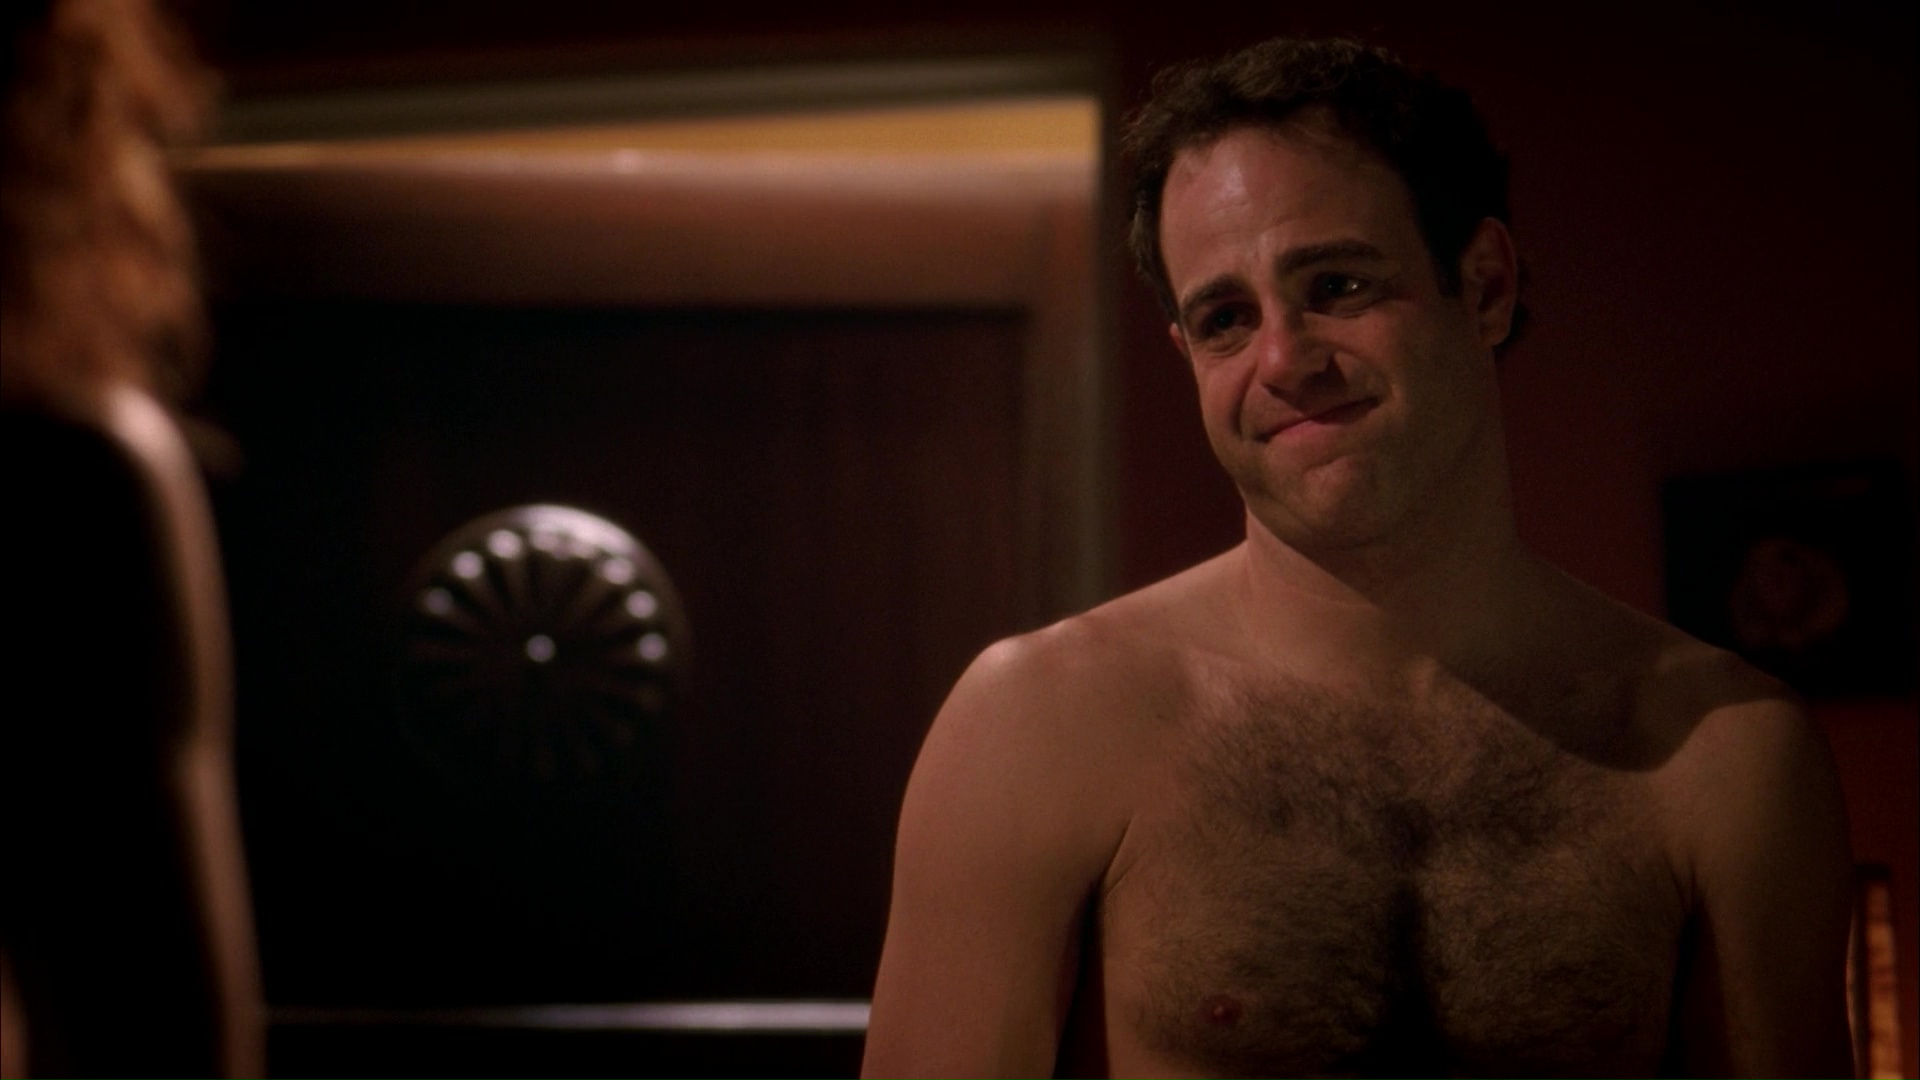 Paul Adelstein shirtless in Private Practice 1-07 "In Which Sam Gets T...